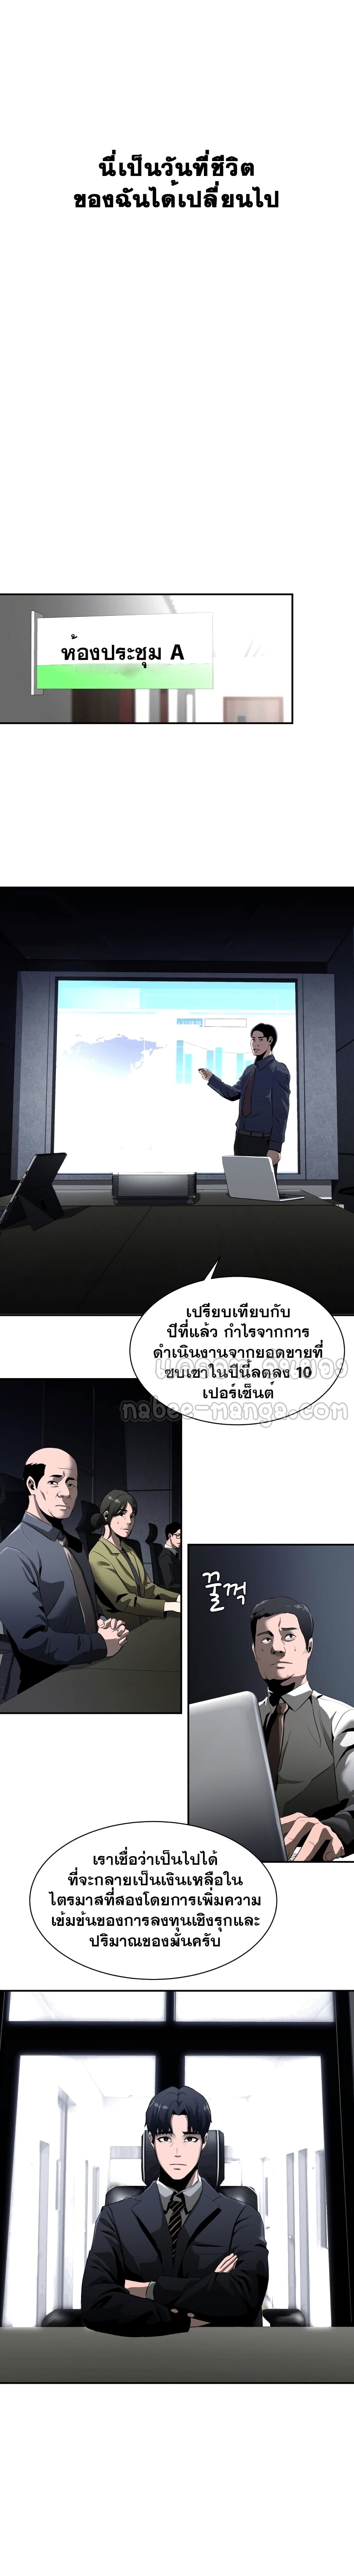 Surviving As a Fish ตอนที่ 1 (6)